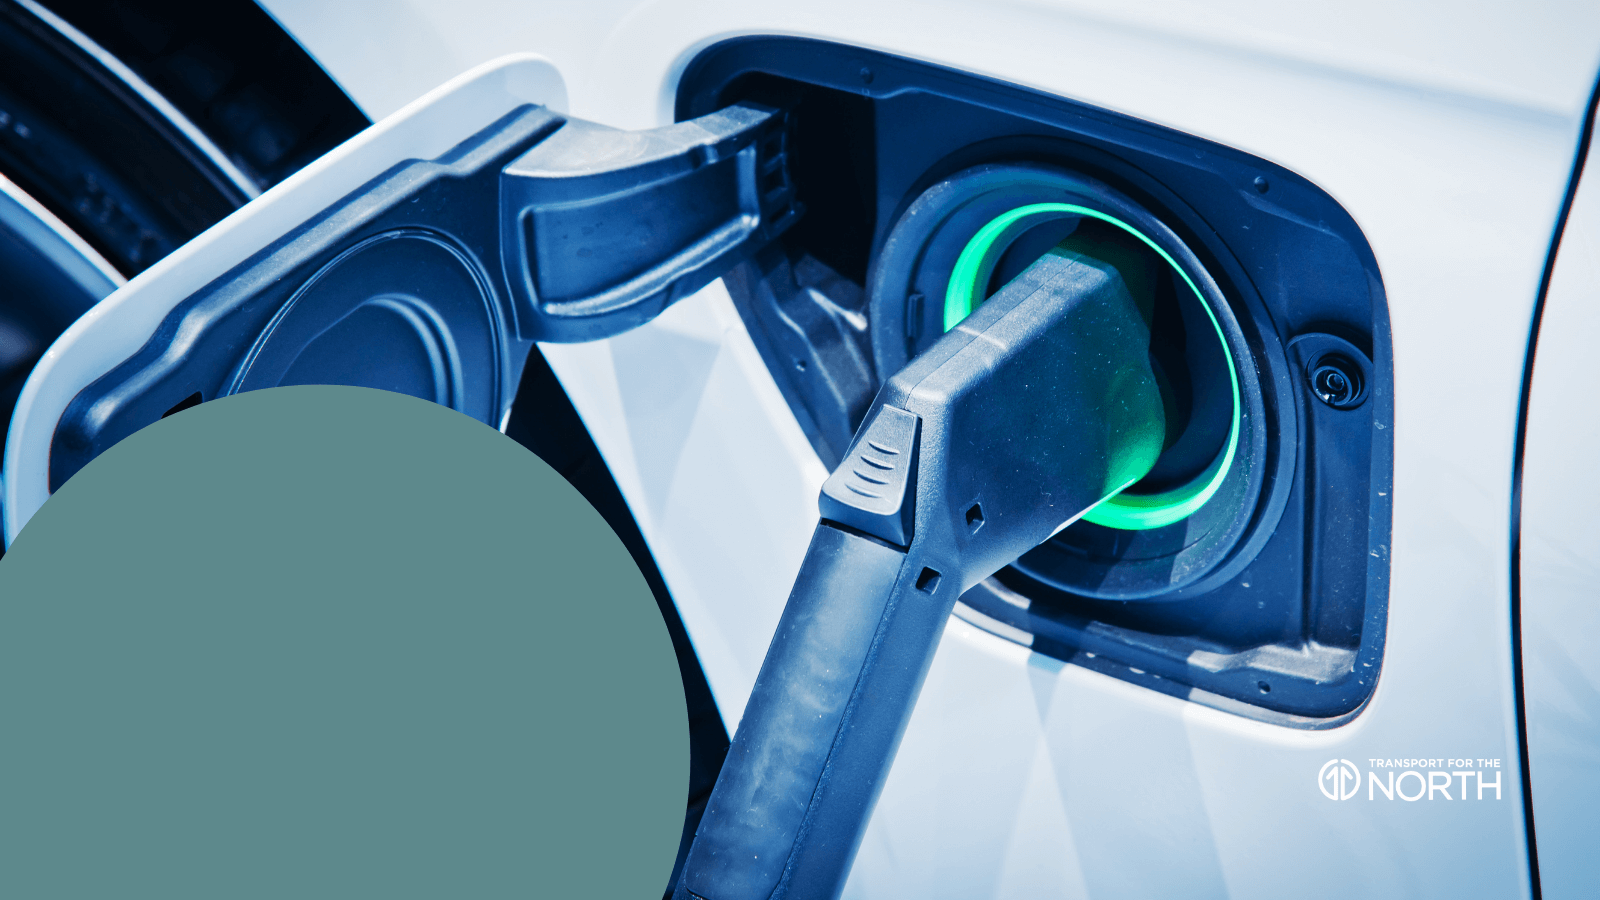 Pioneering Electric Vehicle charging points in the North East